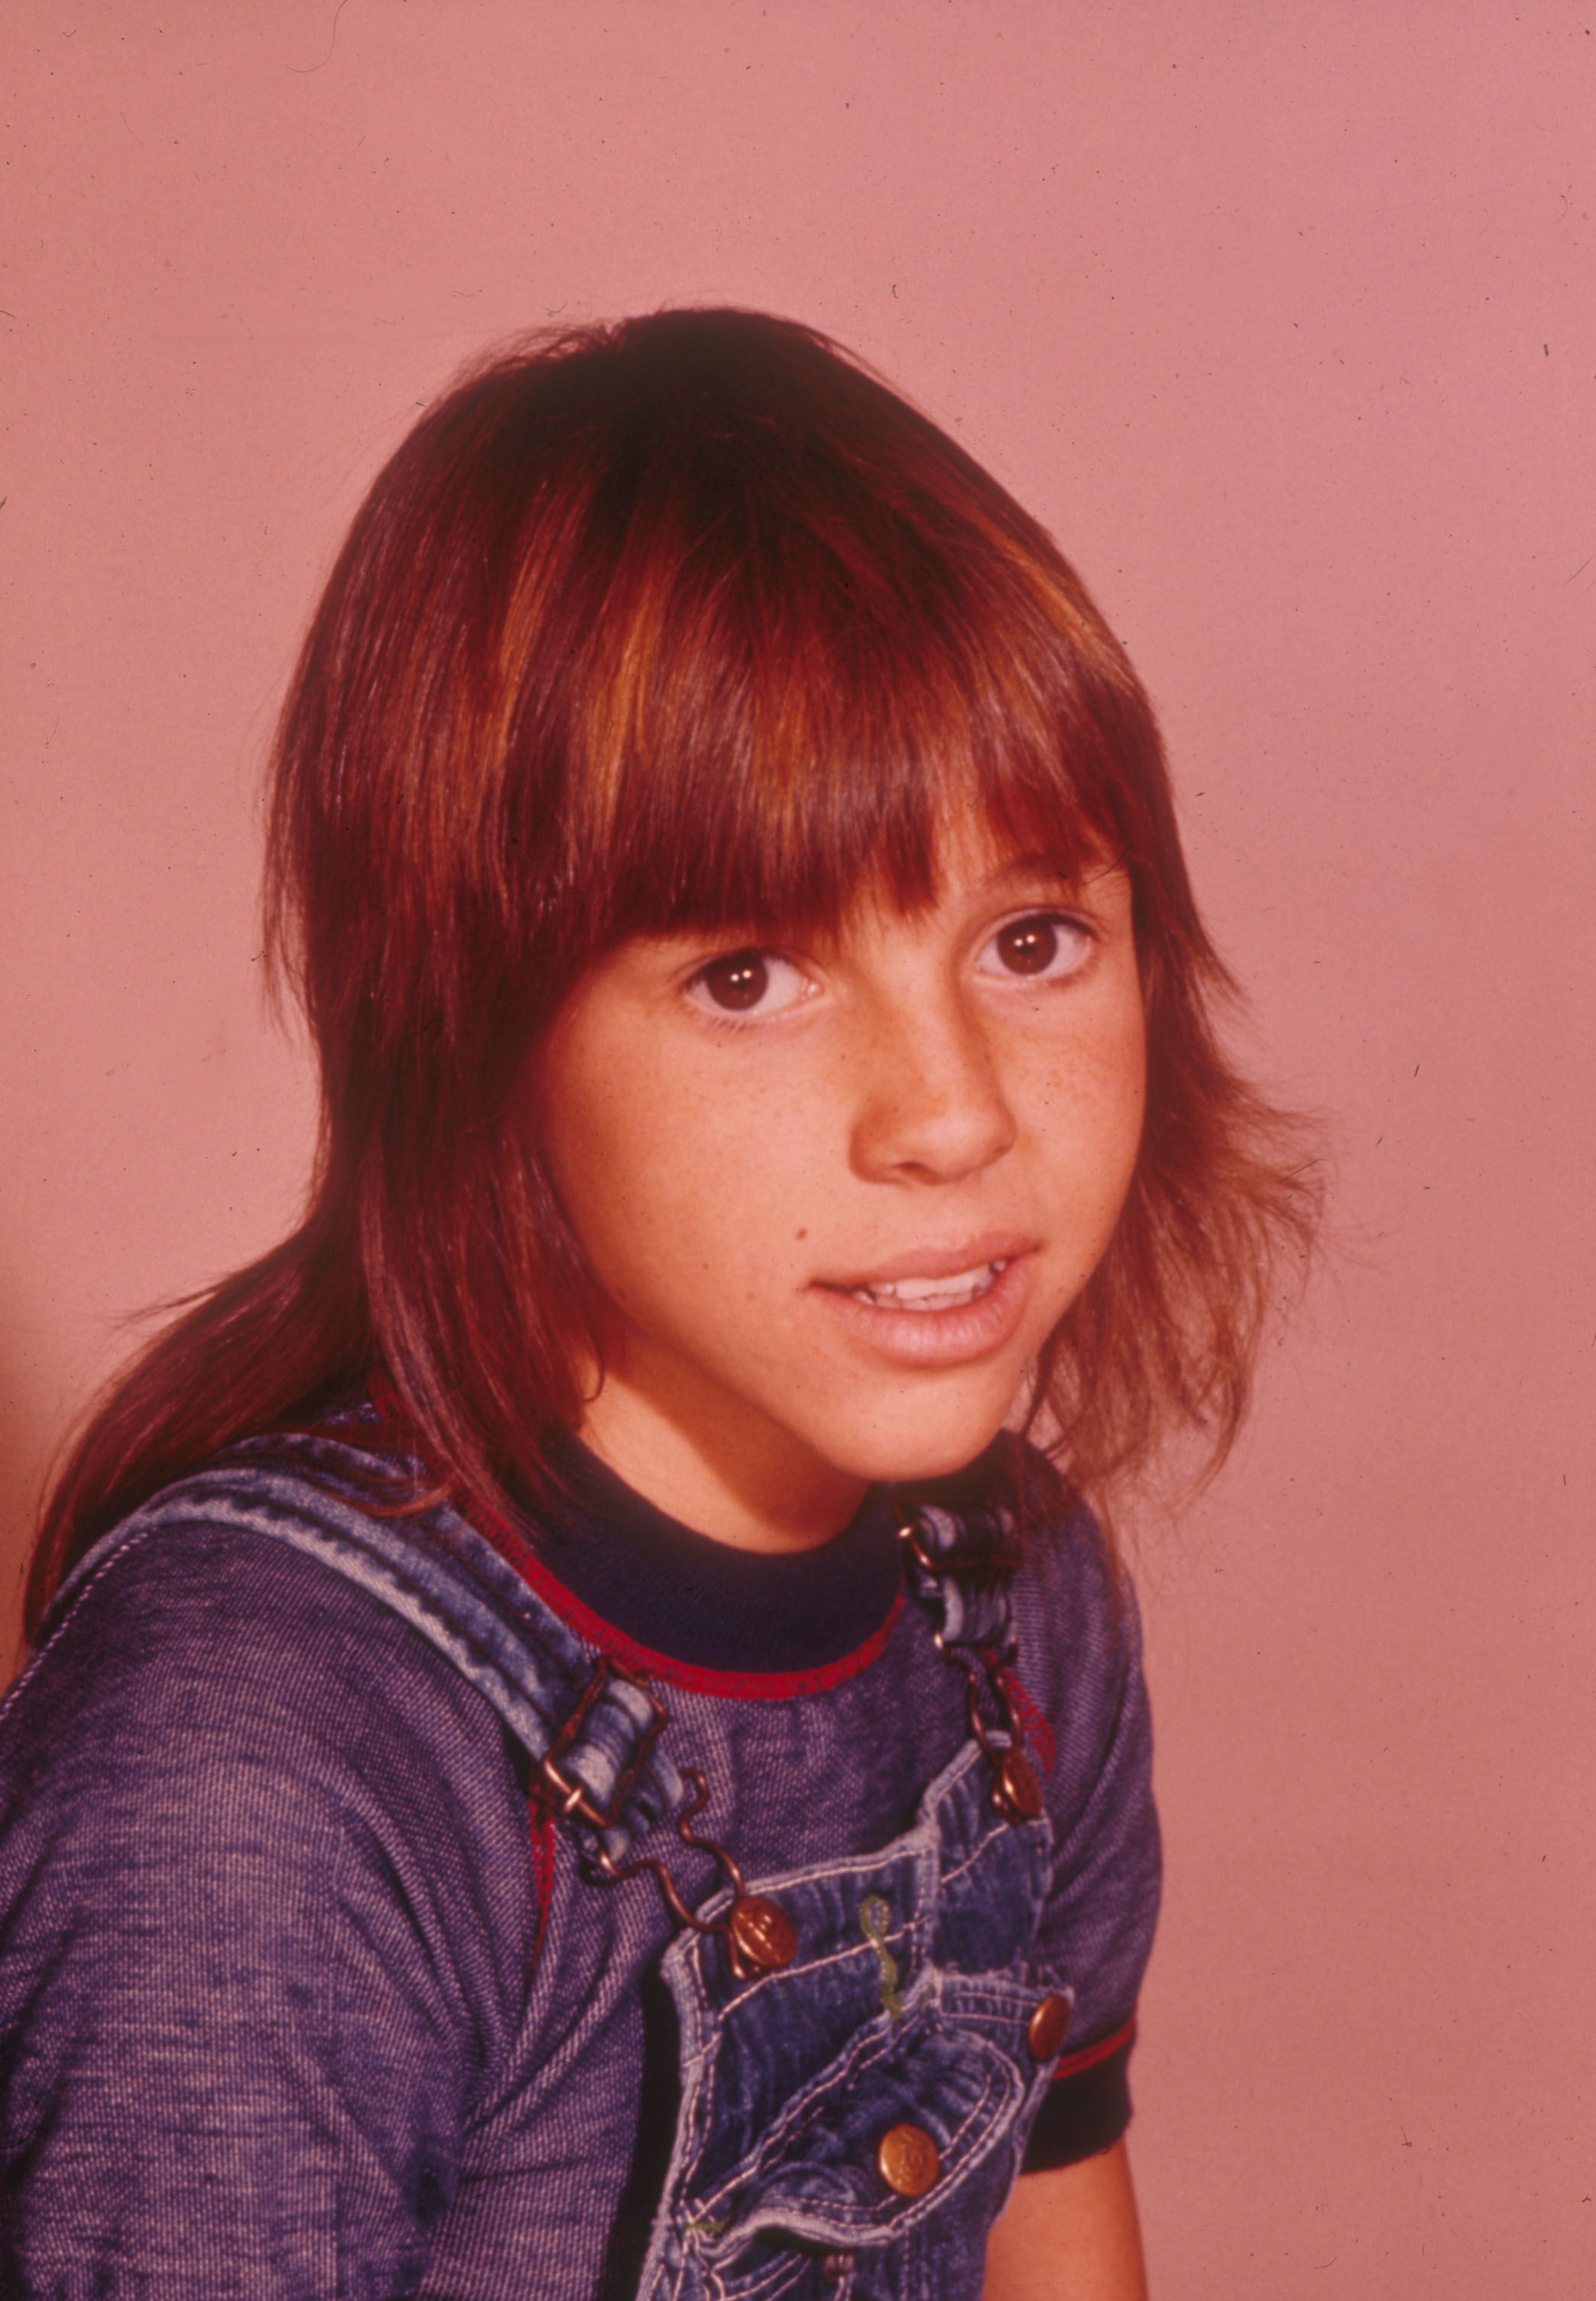 <p>Kristy McNichol landed her first series-regular role -- Patricia Apple on "Apple's Way" -- at 12 in 1974. She went on to play Letitia "Buddy" Lawrence on "Family" and earned two Emmys for her work on the TV drama. Kristy also scored a Golden Globe nomination in 1982 for her performance in "Only When I Laugh" before she retired from acting in 1998.</p>